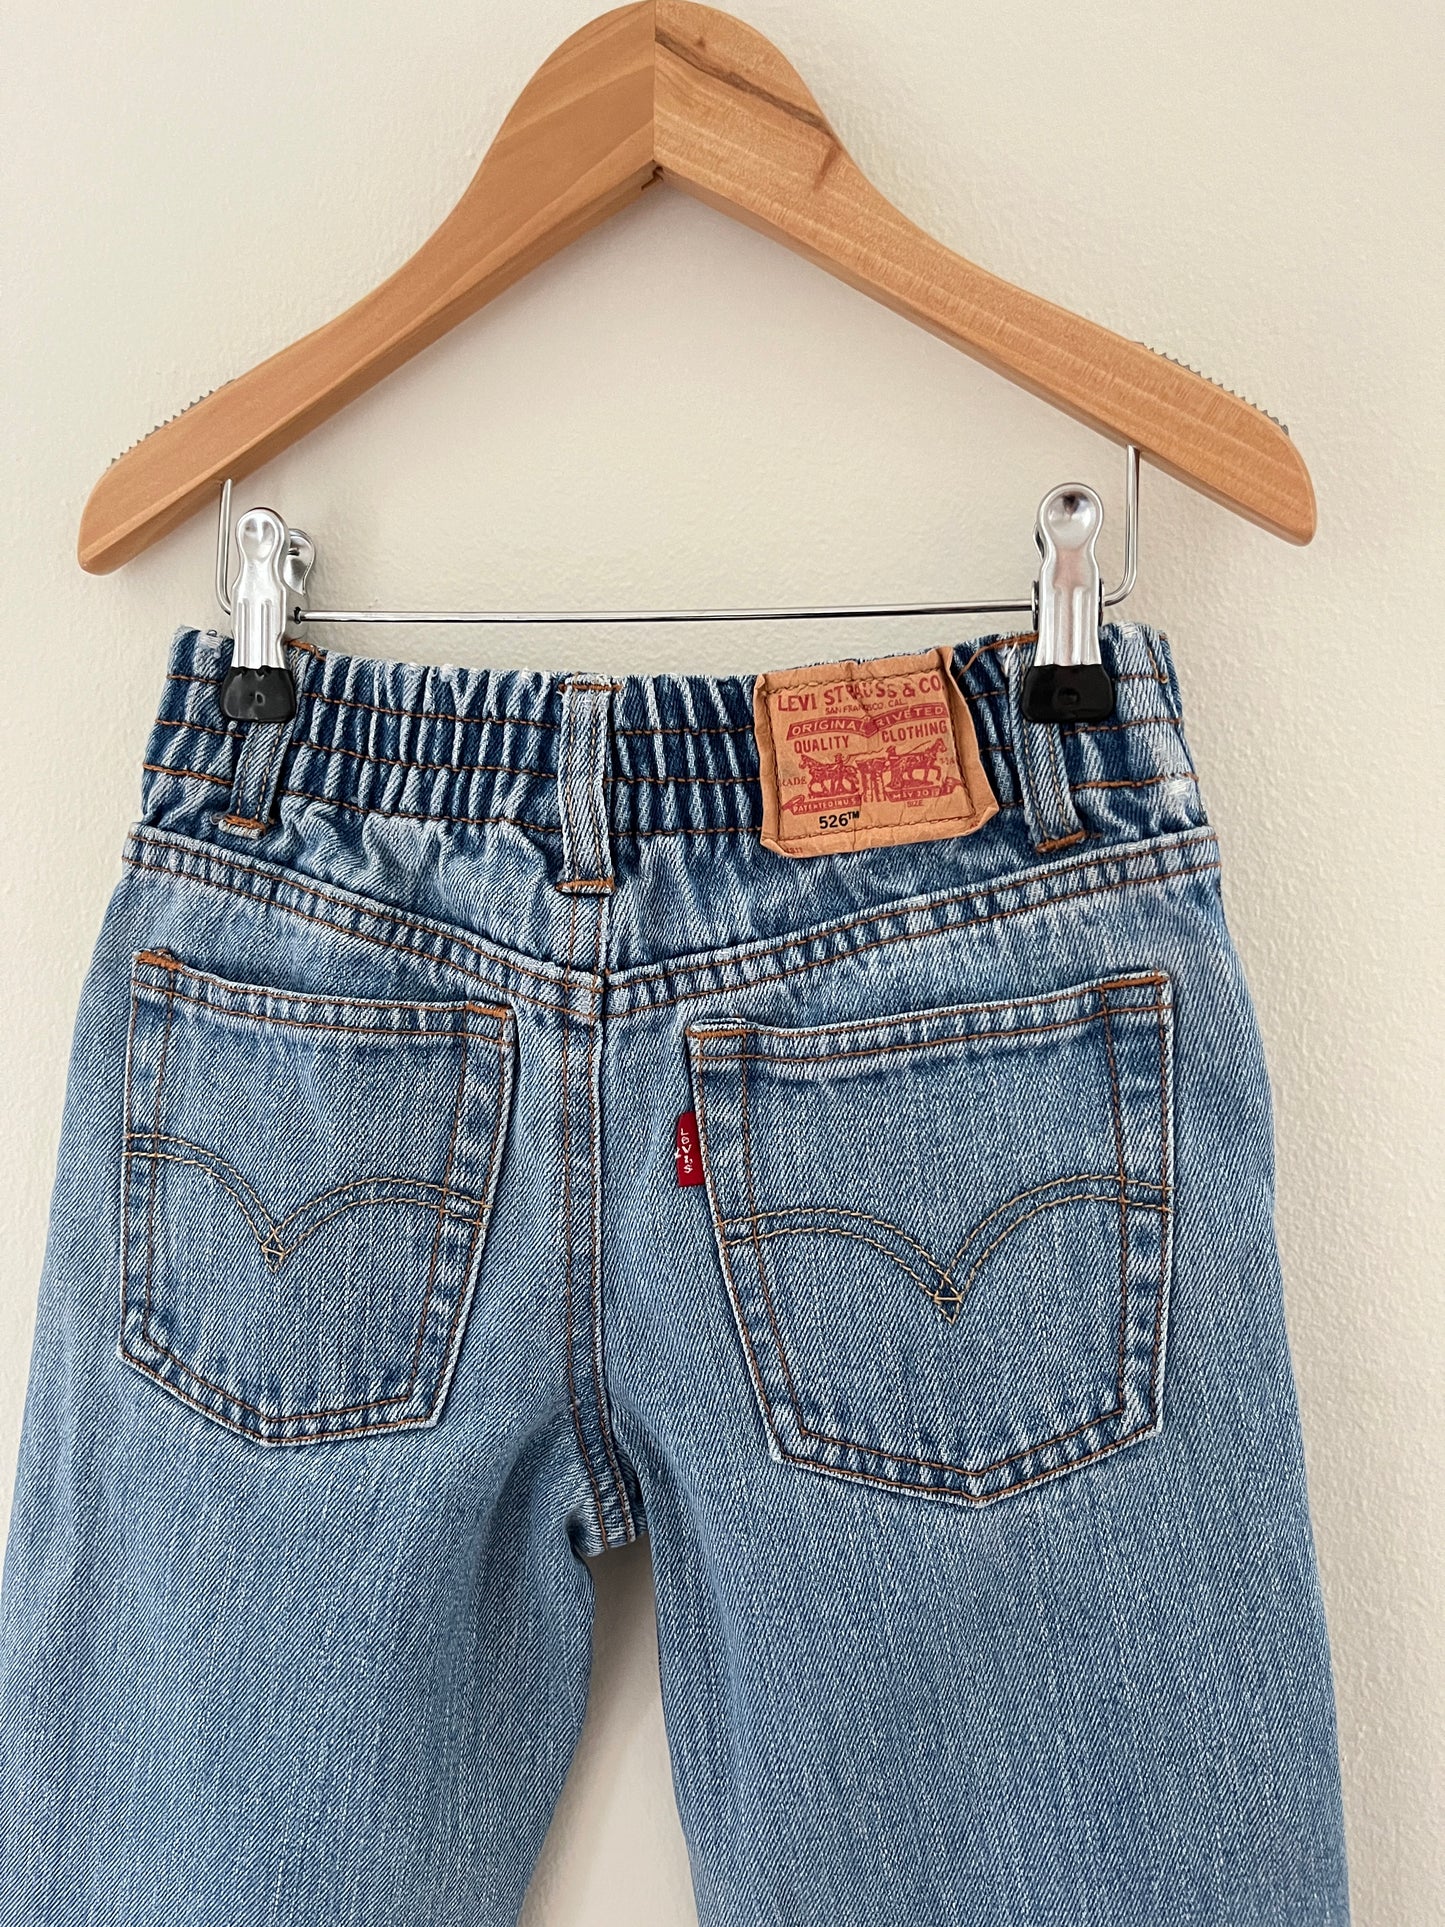 Jeans, 98/104